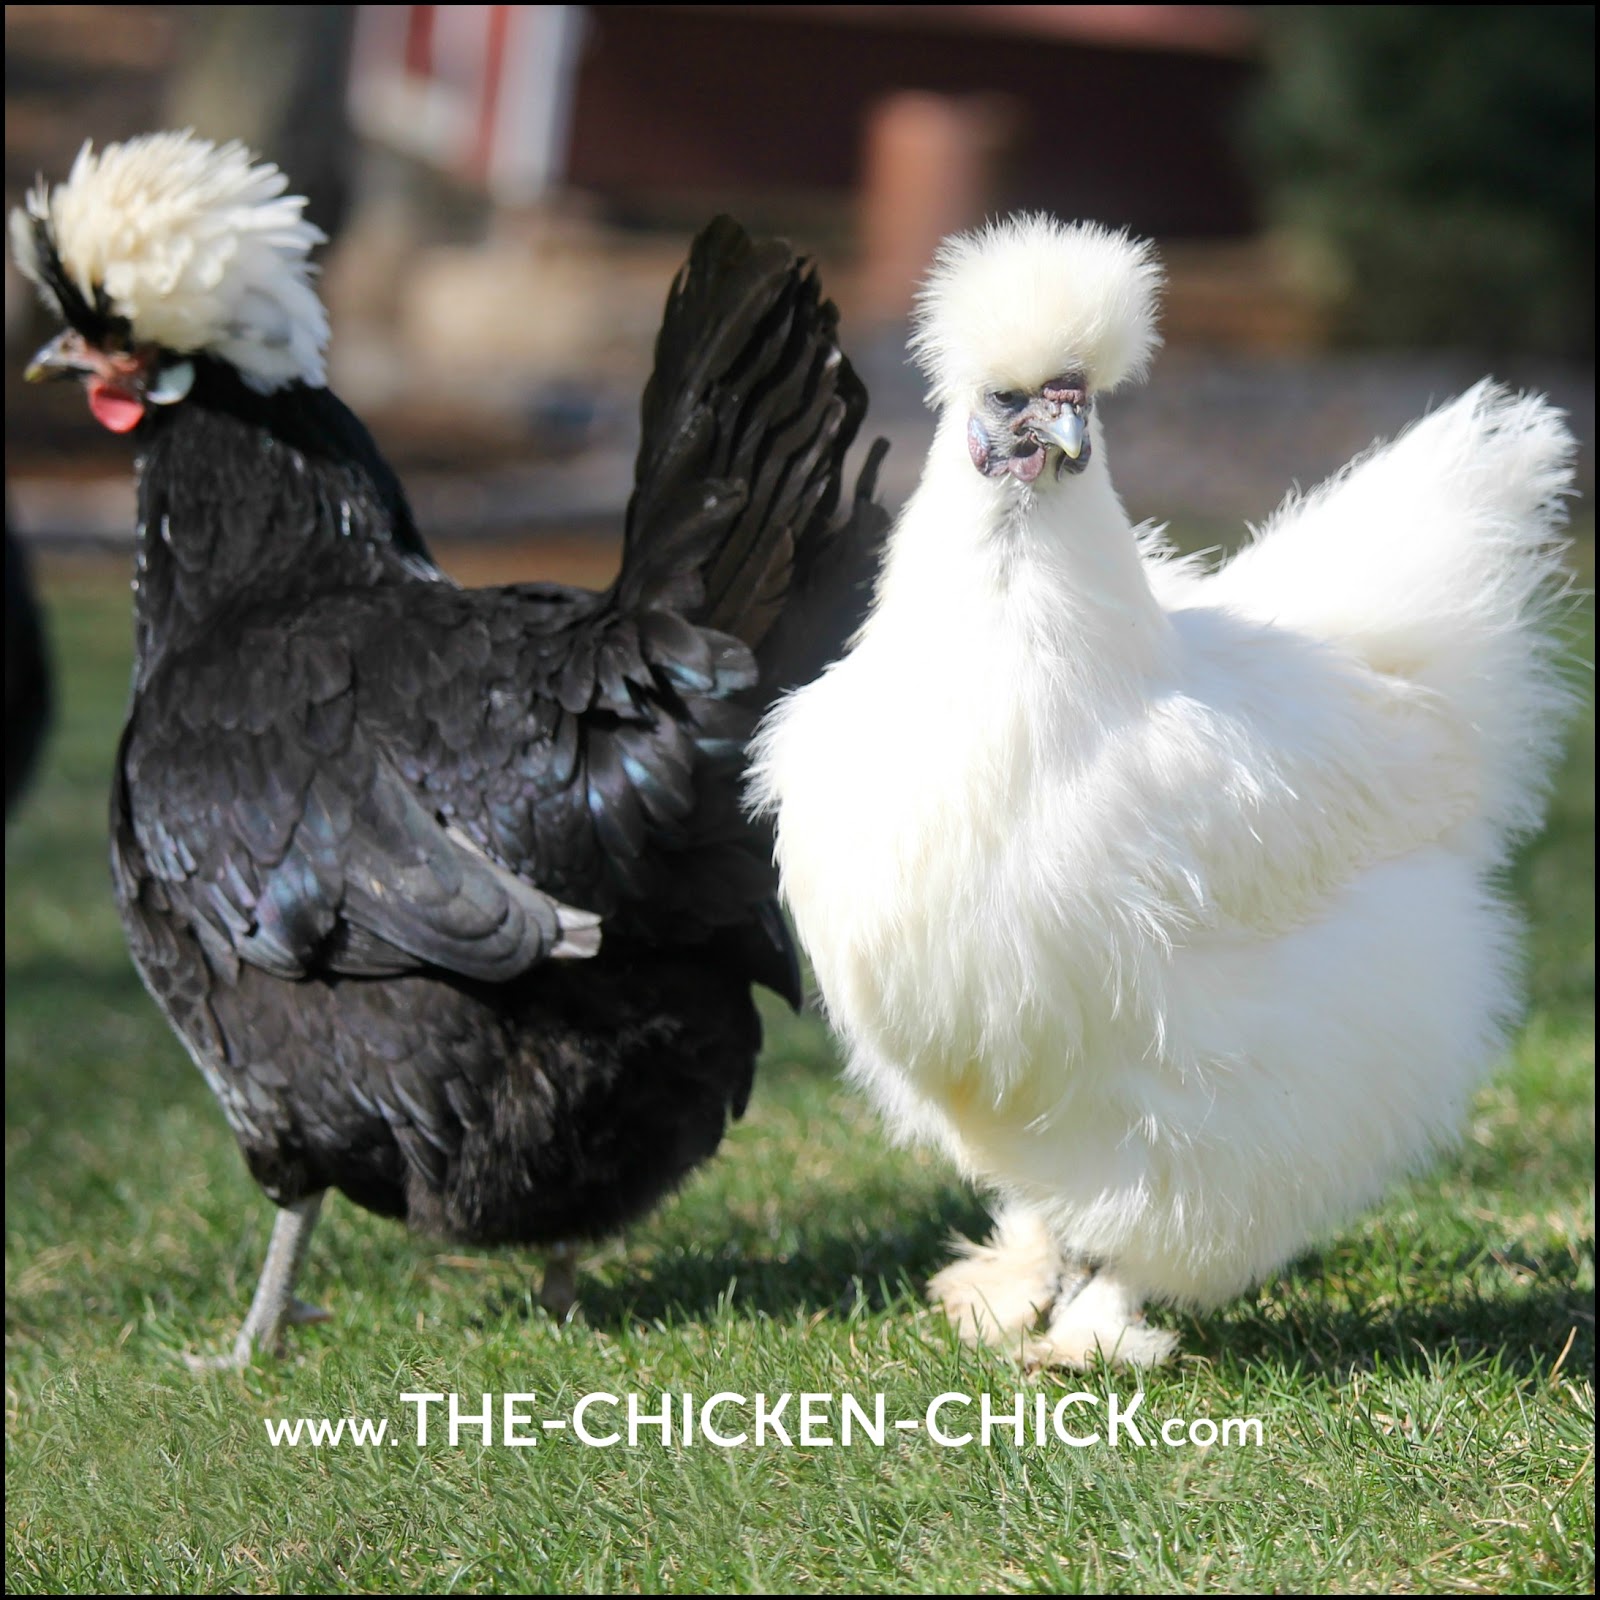 Crested Chickens The Chicken Chick.jpg